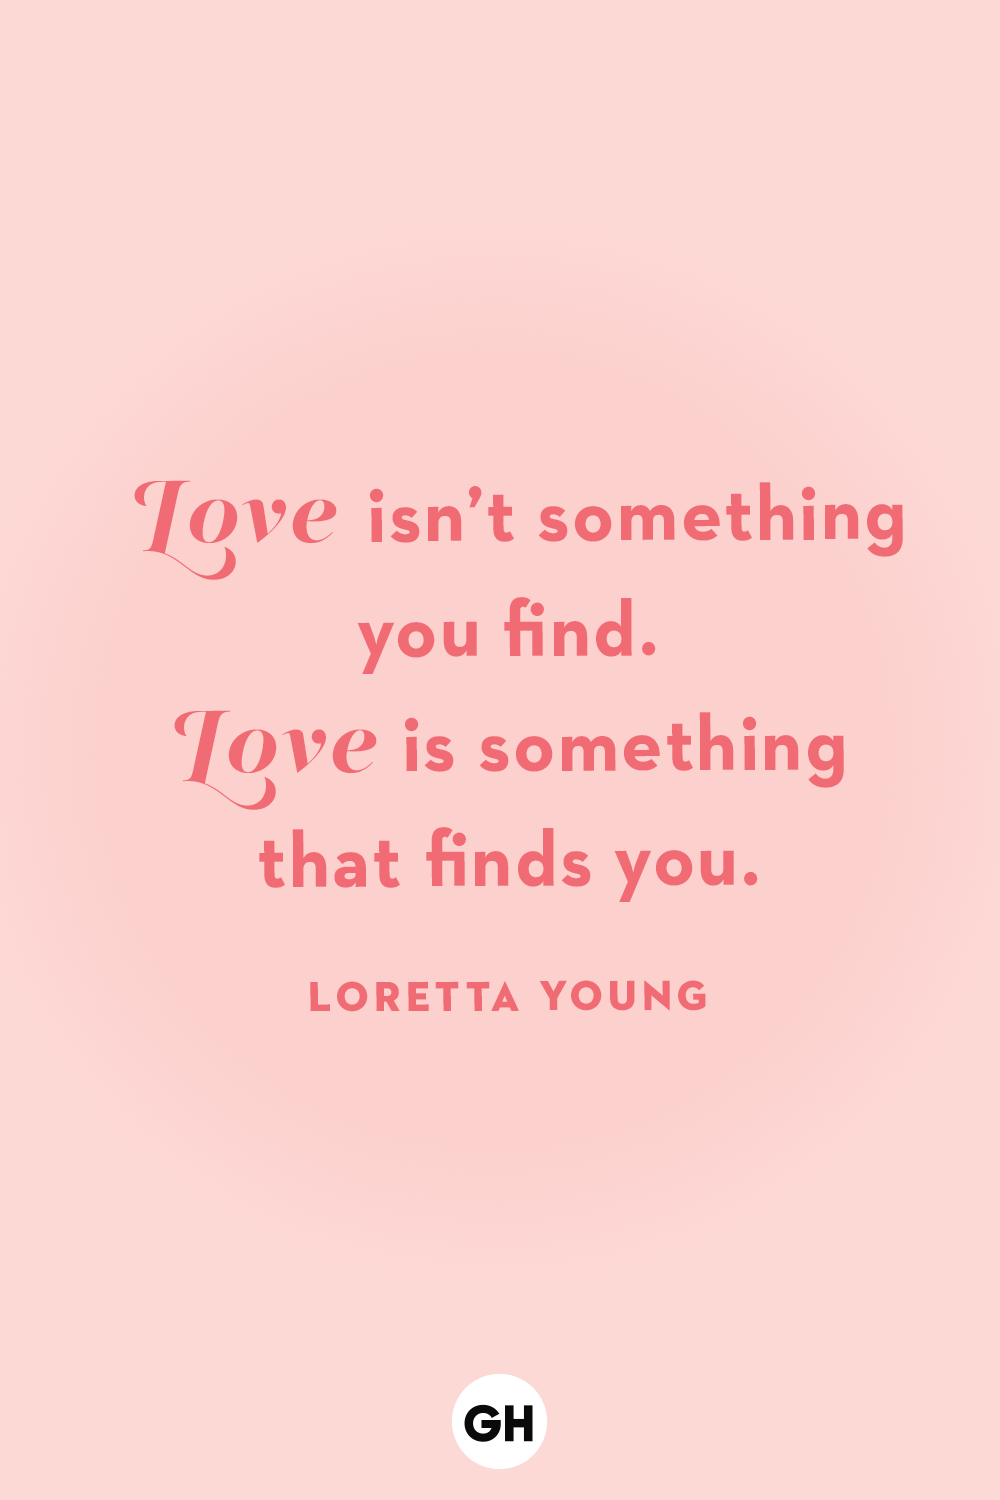 loving life quotes and sayings